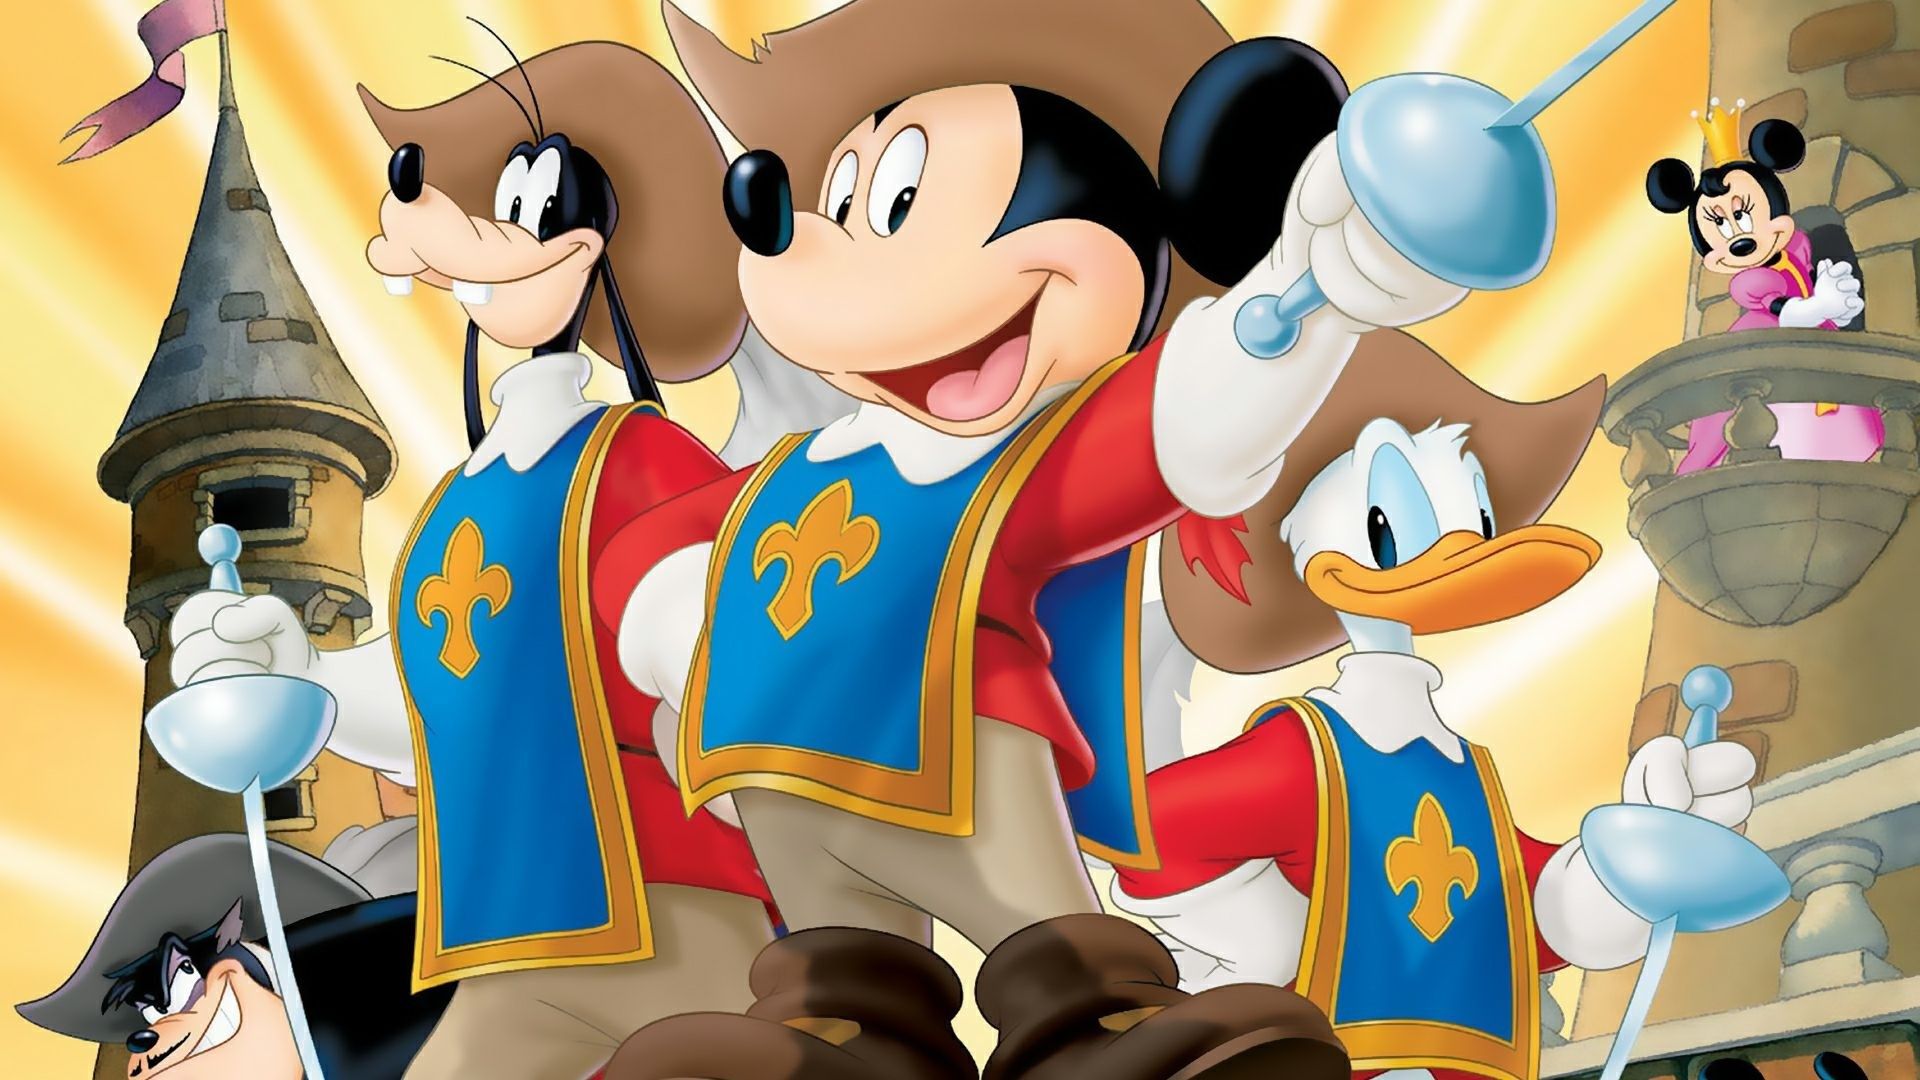 1920x1080 px mickey donald goofy the three musketeers picture for large desktop